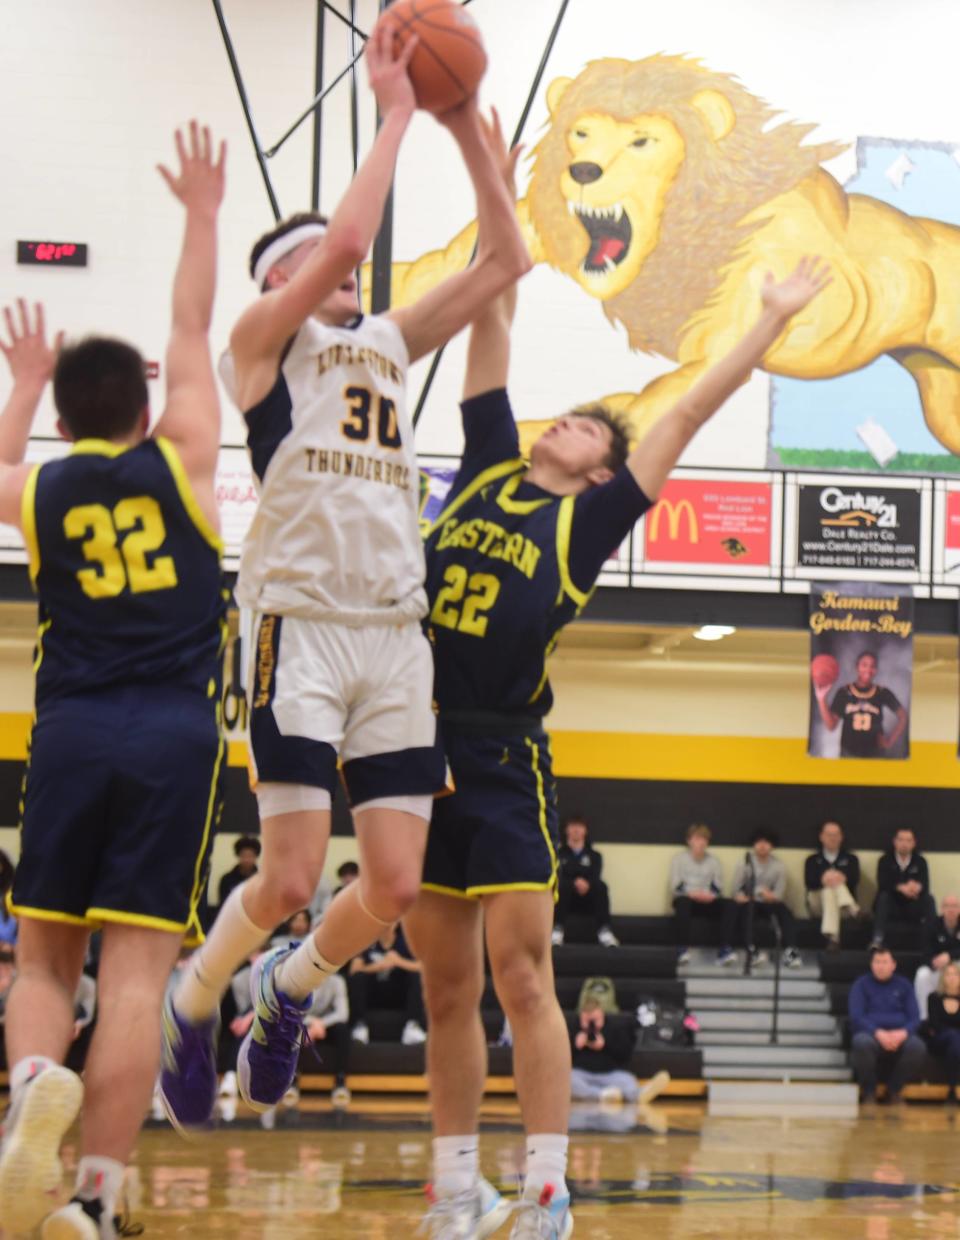 Littlestown's Christopher Meakin goes up for a shot against Eastern York Friday. Eastern York beat Littlestown, 57-49, in the YAIAA boys' basketball quarterfinals at Red Lion High School, Friday, Feb. 11, 2023.